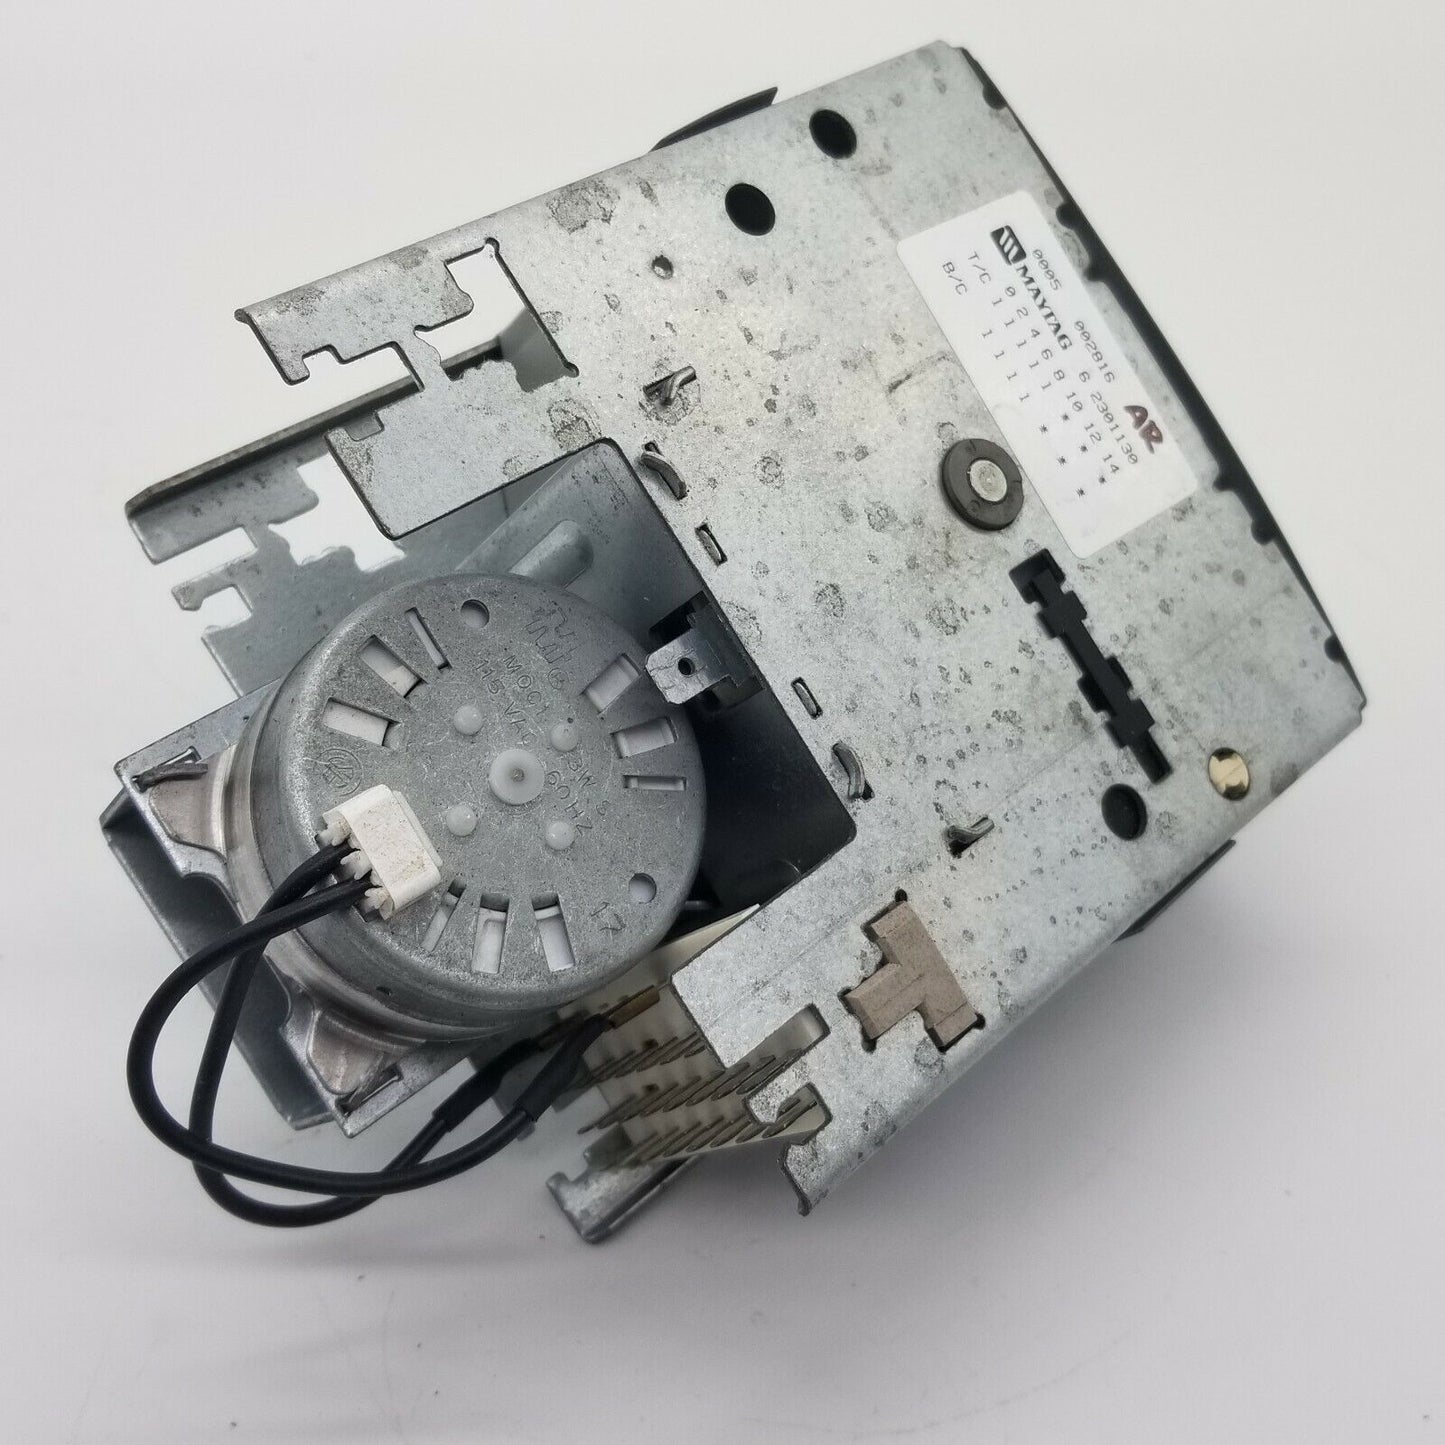 Genuine OEM Replacement for Maytag Washer Timer 62301130